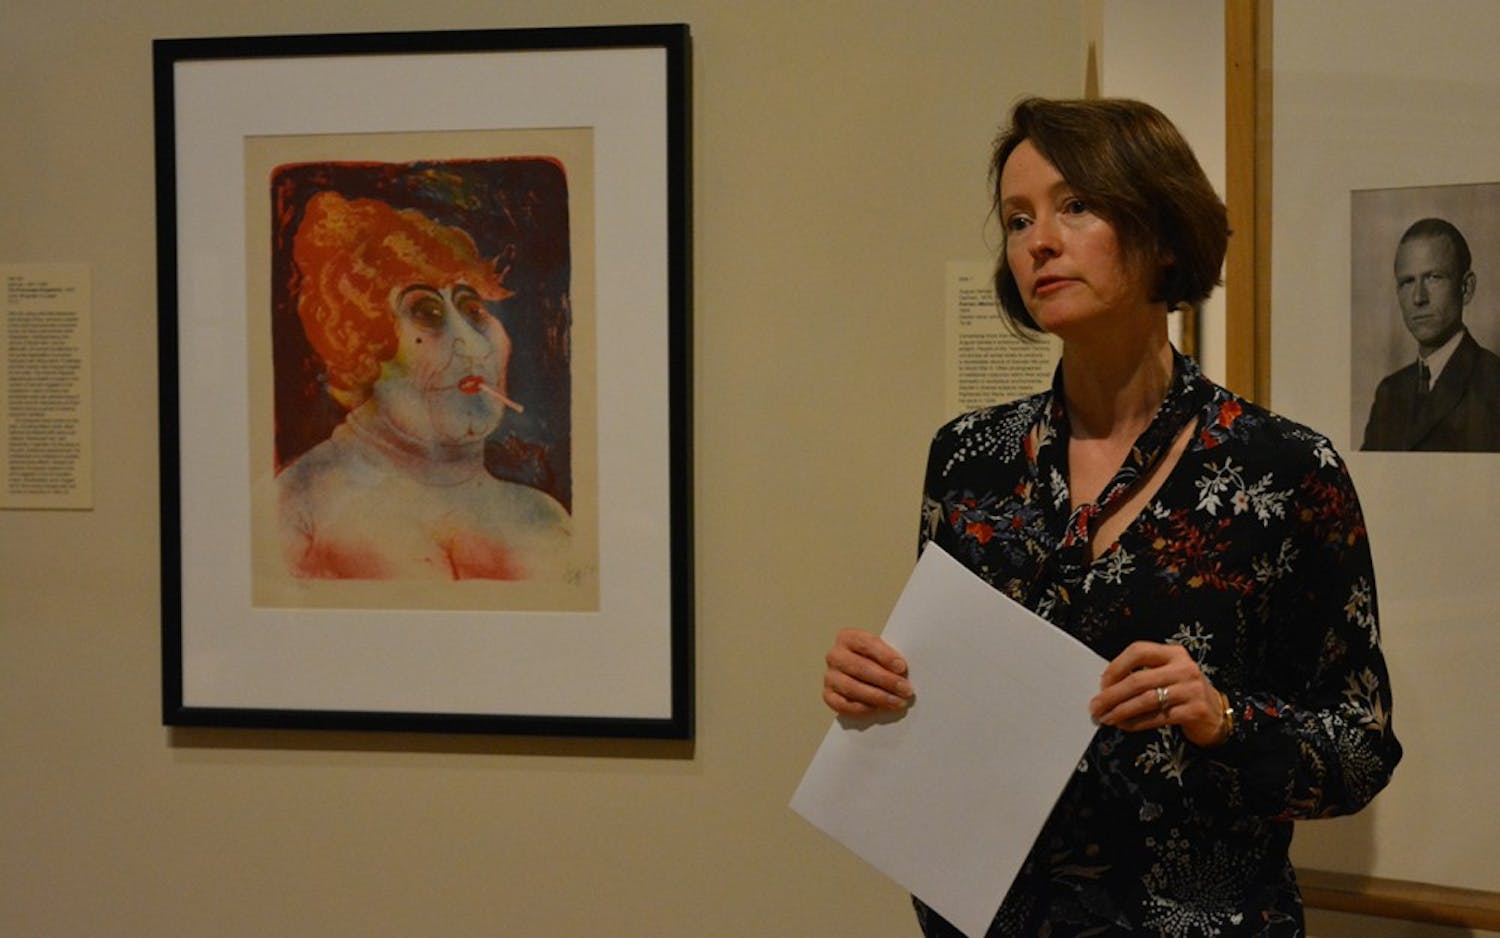 Julia Roos addresses an audience question next to a lithograph done by artist Otto Dix. This event took place Wednesday afternoon in the Eskenazi Museum of Art.